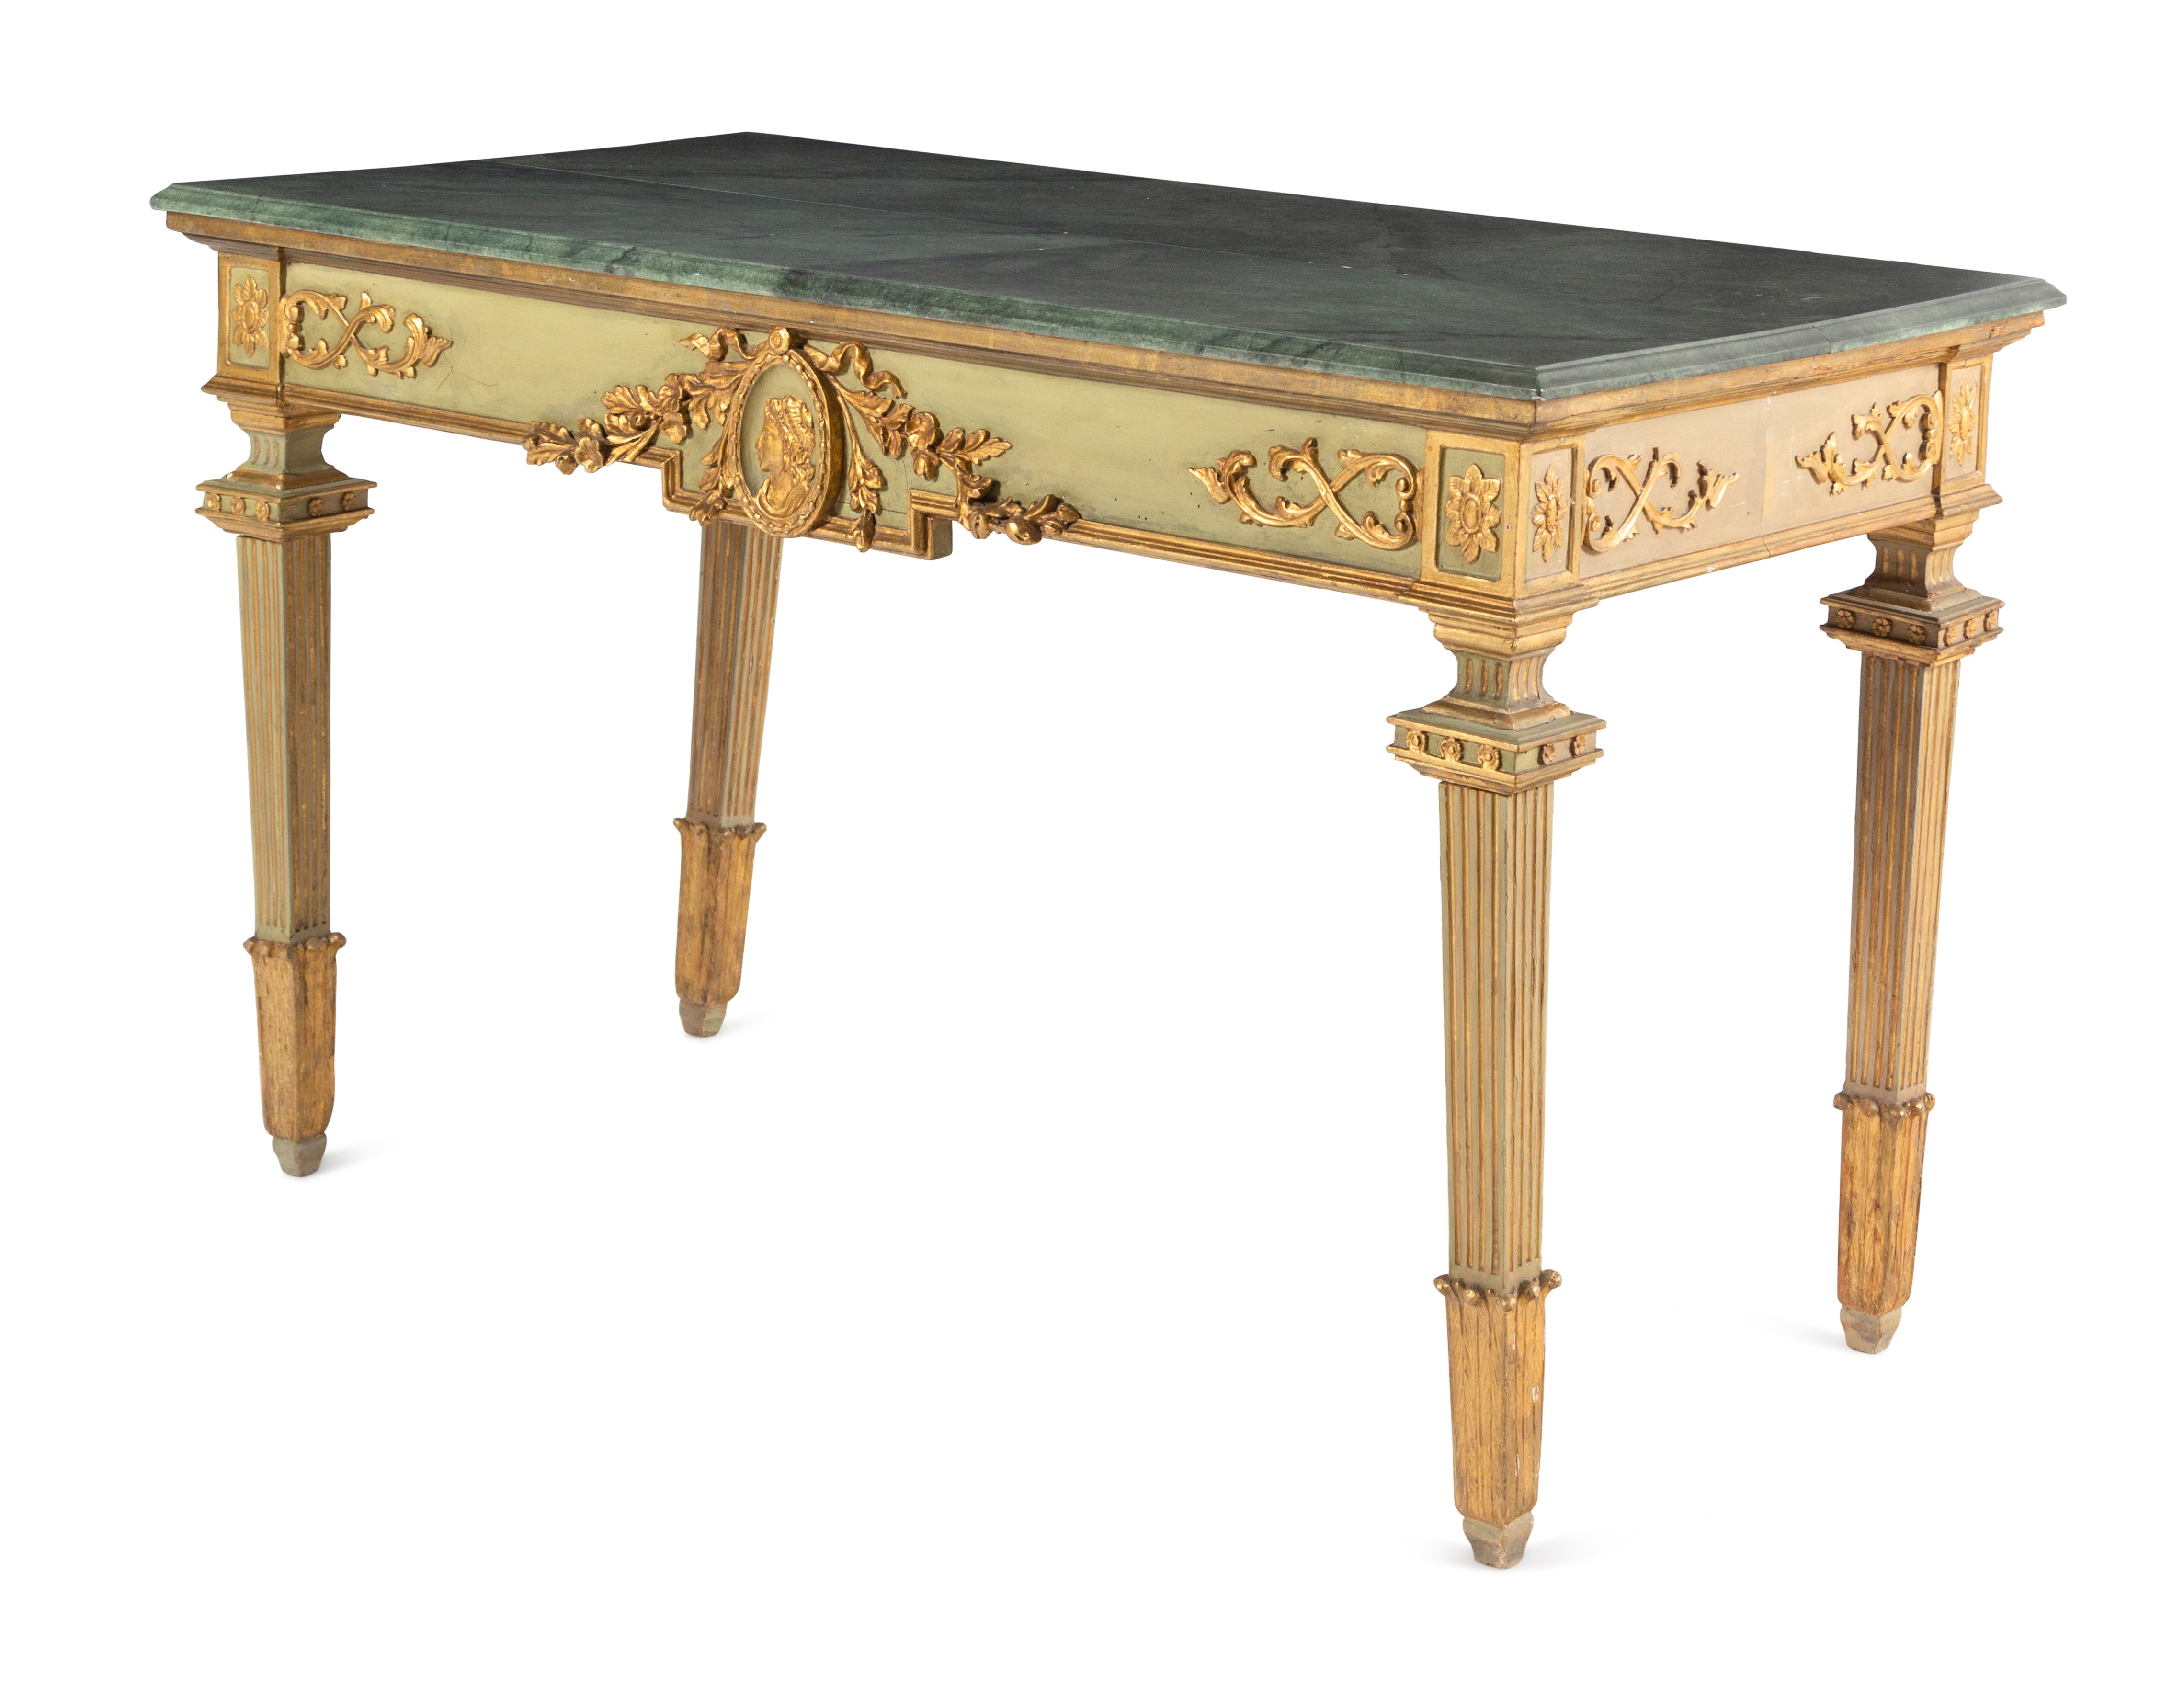 A North Italian Neoclassical Painted and Parcel-Gilt Console Table - Image 2 of 4